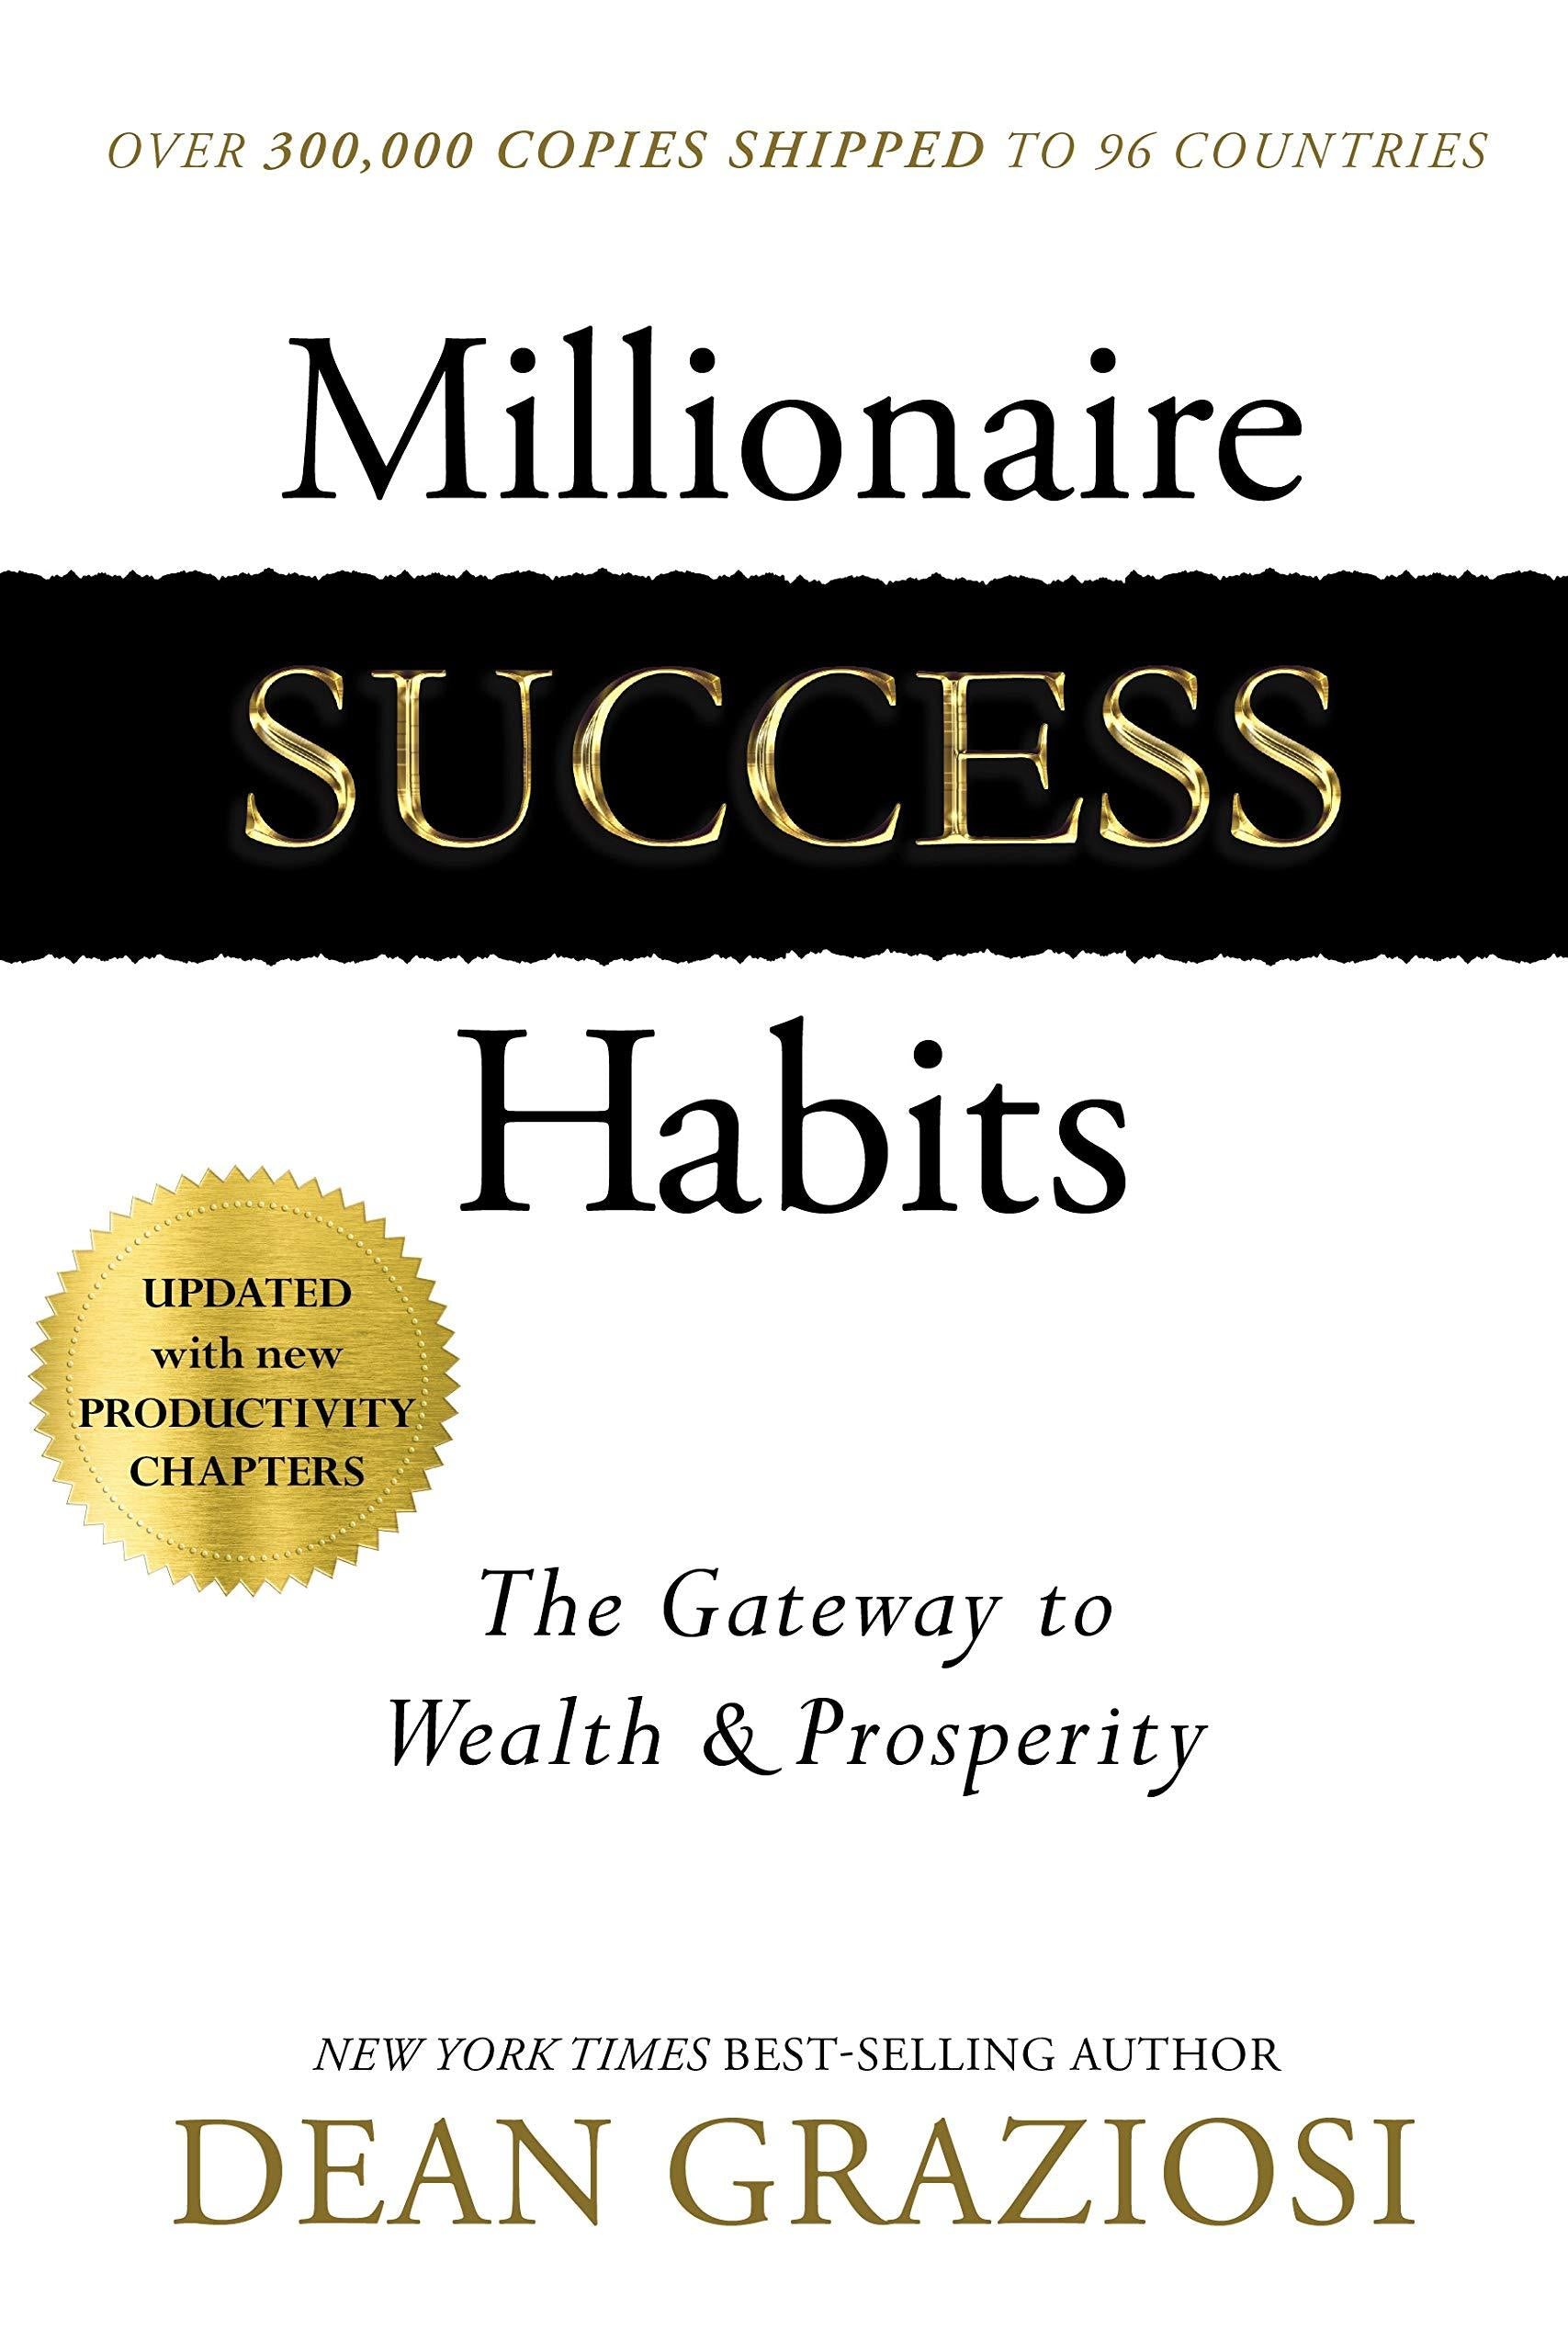 Millionaire Success Habits: The Gateway to Wealth & Prosperity Hardcover